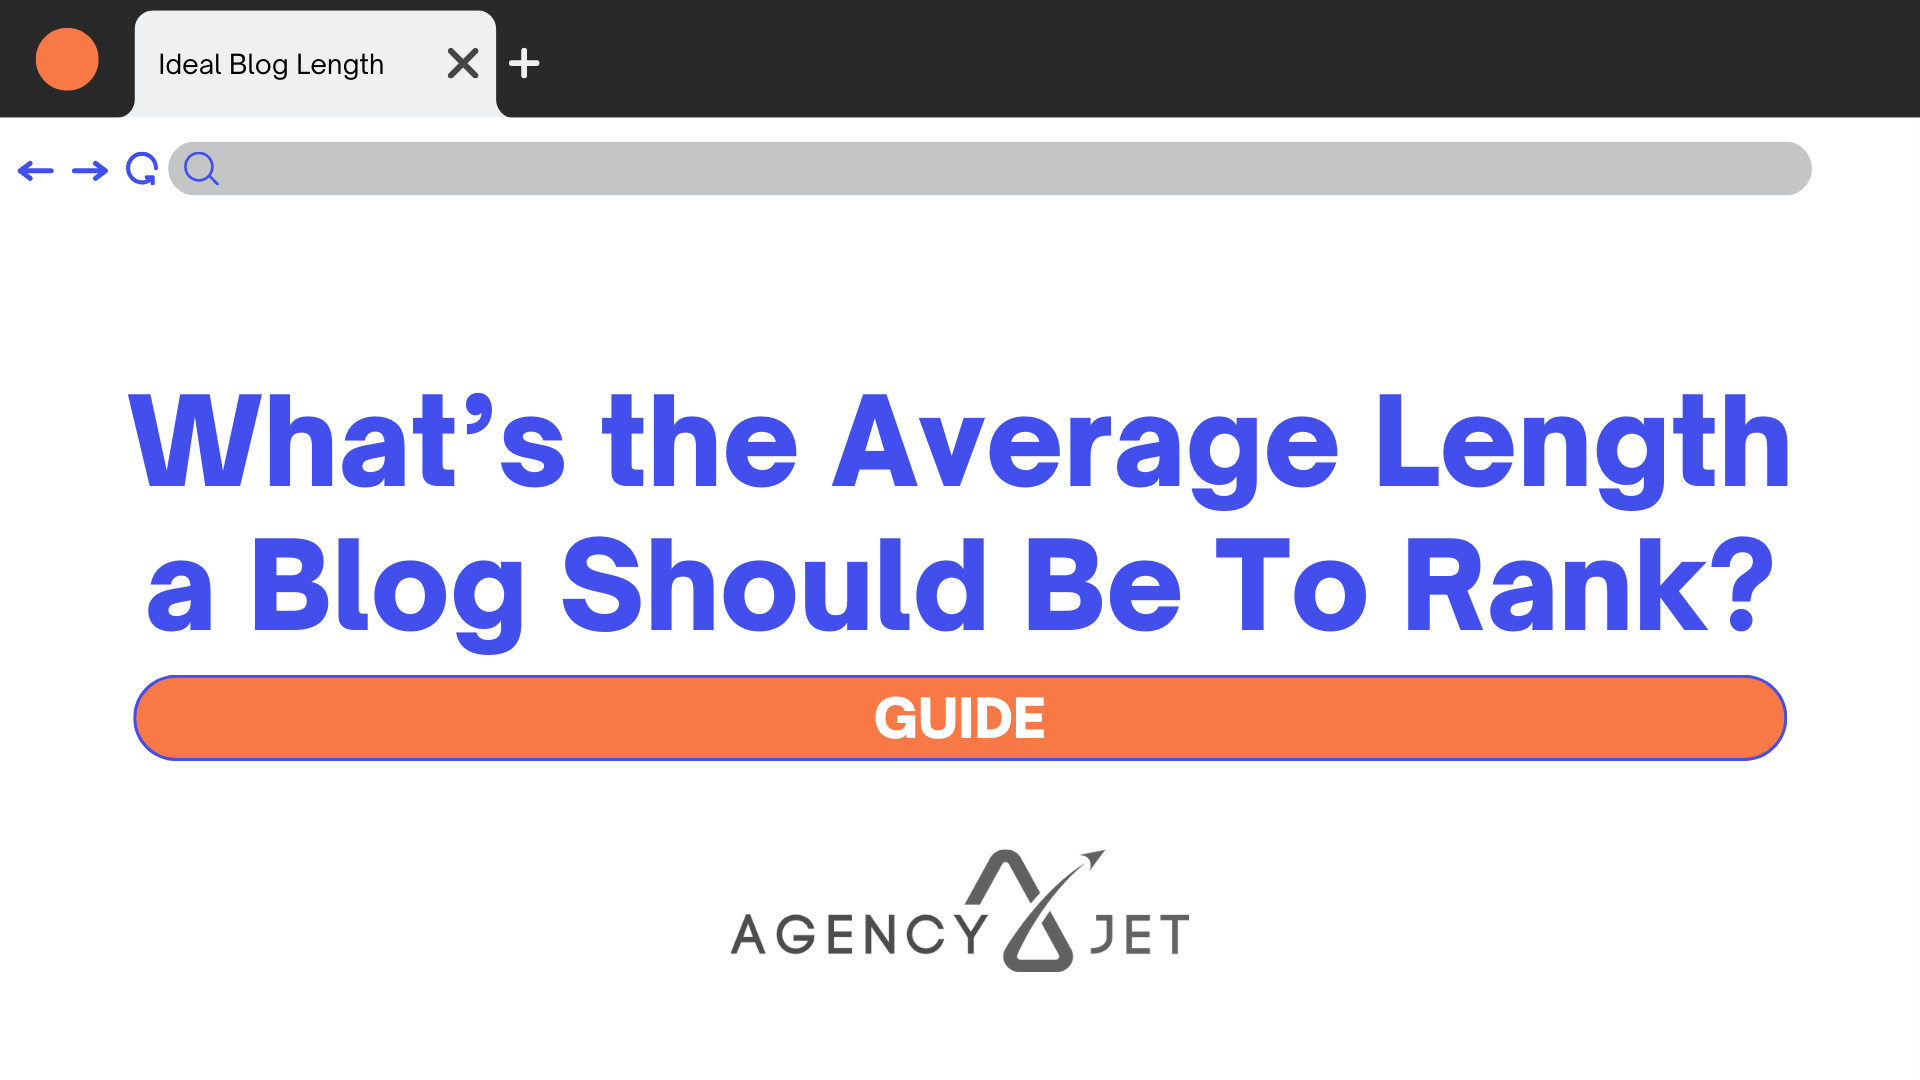 What’s the Average Length a Blog Should Be To Rank - Agency Jet (1)